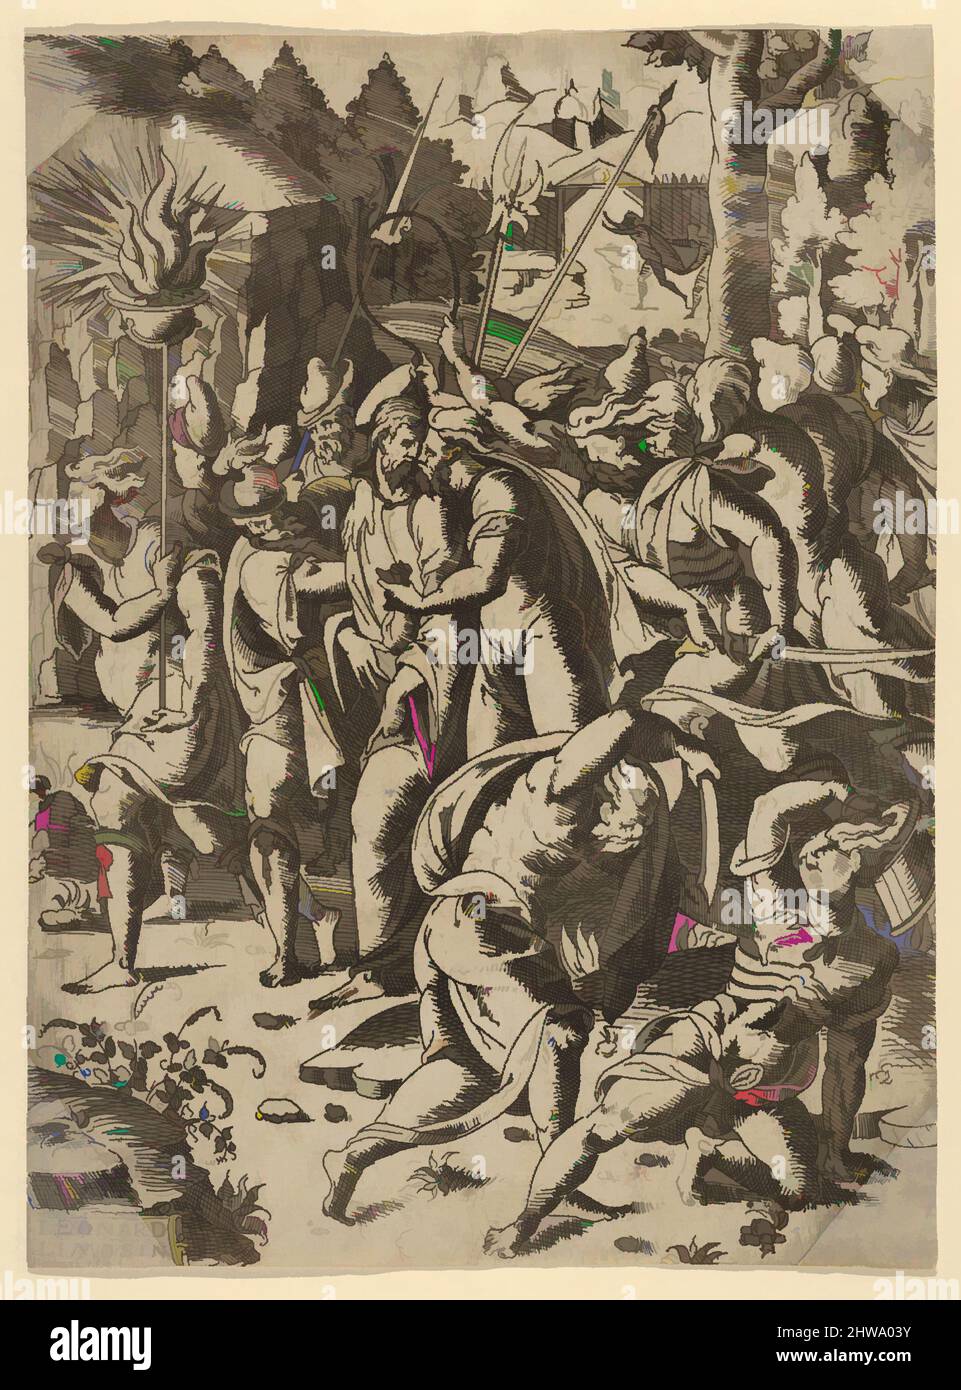 Art inspired by Drawings and Prints, Print, The Betrayal of Christ, Artist, Léonard Limosin, ca. 1505–1575/1577, LIMOSIN LÉONARD, 1505, 1577, Classic works modernized by Artotop with a splash of modernity. Shapes, color and value, eye-catching visual impact on art. Emotions through freedom of artworks in a contemporary way. A timeless message pursuing a wildly creative new direction. Artists turning to the digital medium and creating the Artotop NFT Stock Photo